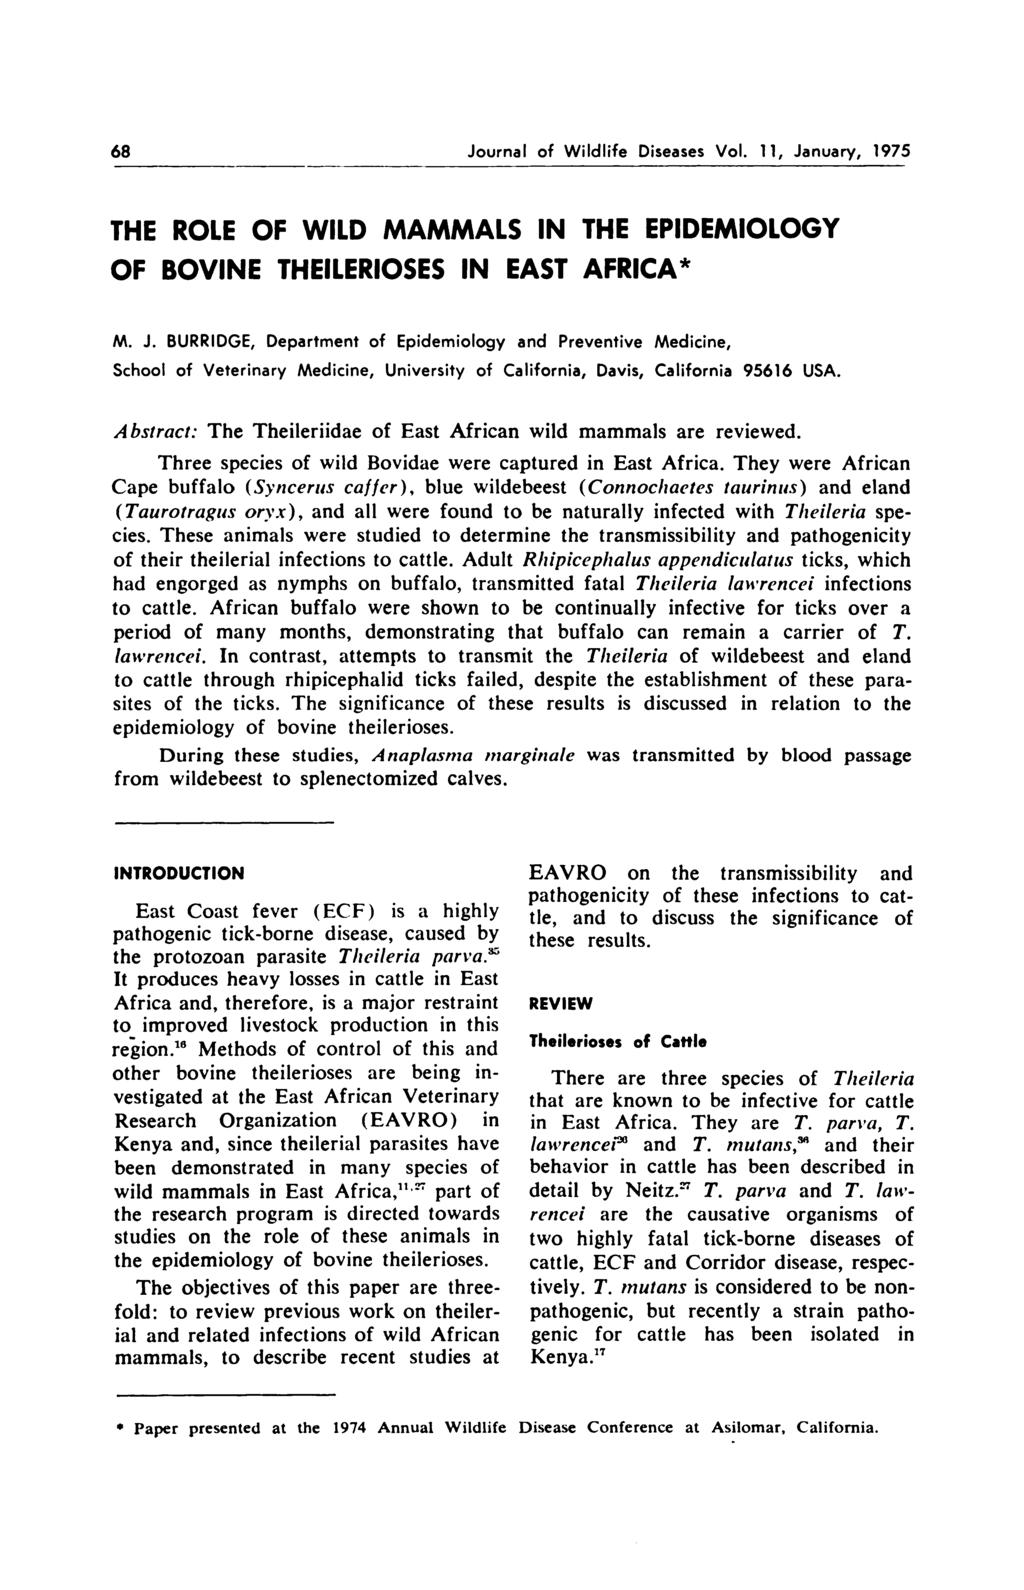 68 Journal of Wildlife Diseases Vol. 11, January, 1975 THE ROLE OF WILD MAMMALS IN THE EPIDEMIOLOGY OF BOVINE THEILERIOSES IN EAST AFRICA* M. J. BURRIDGE, Department of Epidemiology and Preventive Medicine, School of Veterinary Medicine, University of California, Davis, California 95616 USA.